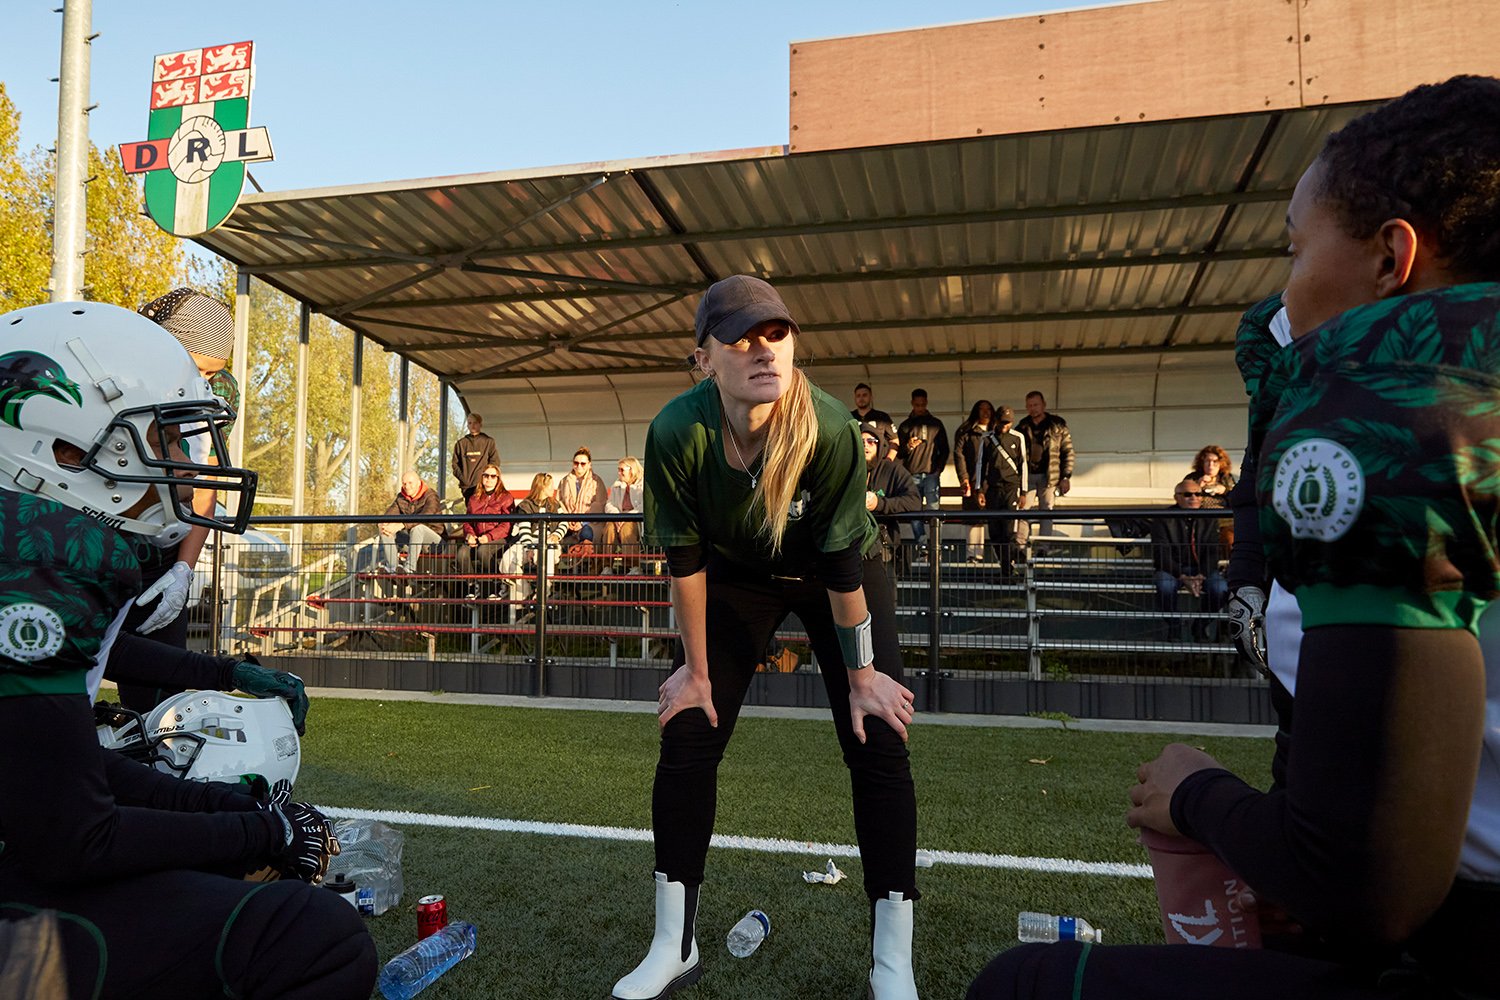  Ravens Assistant Coach Anne used to be a player but left the team after finding the training schedule too strenuous in combination with her daily life. But Anne missed the camaraderie of her teammates so decided to return as a defensive coach. 